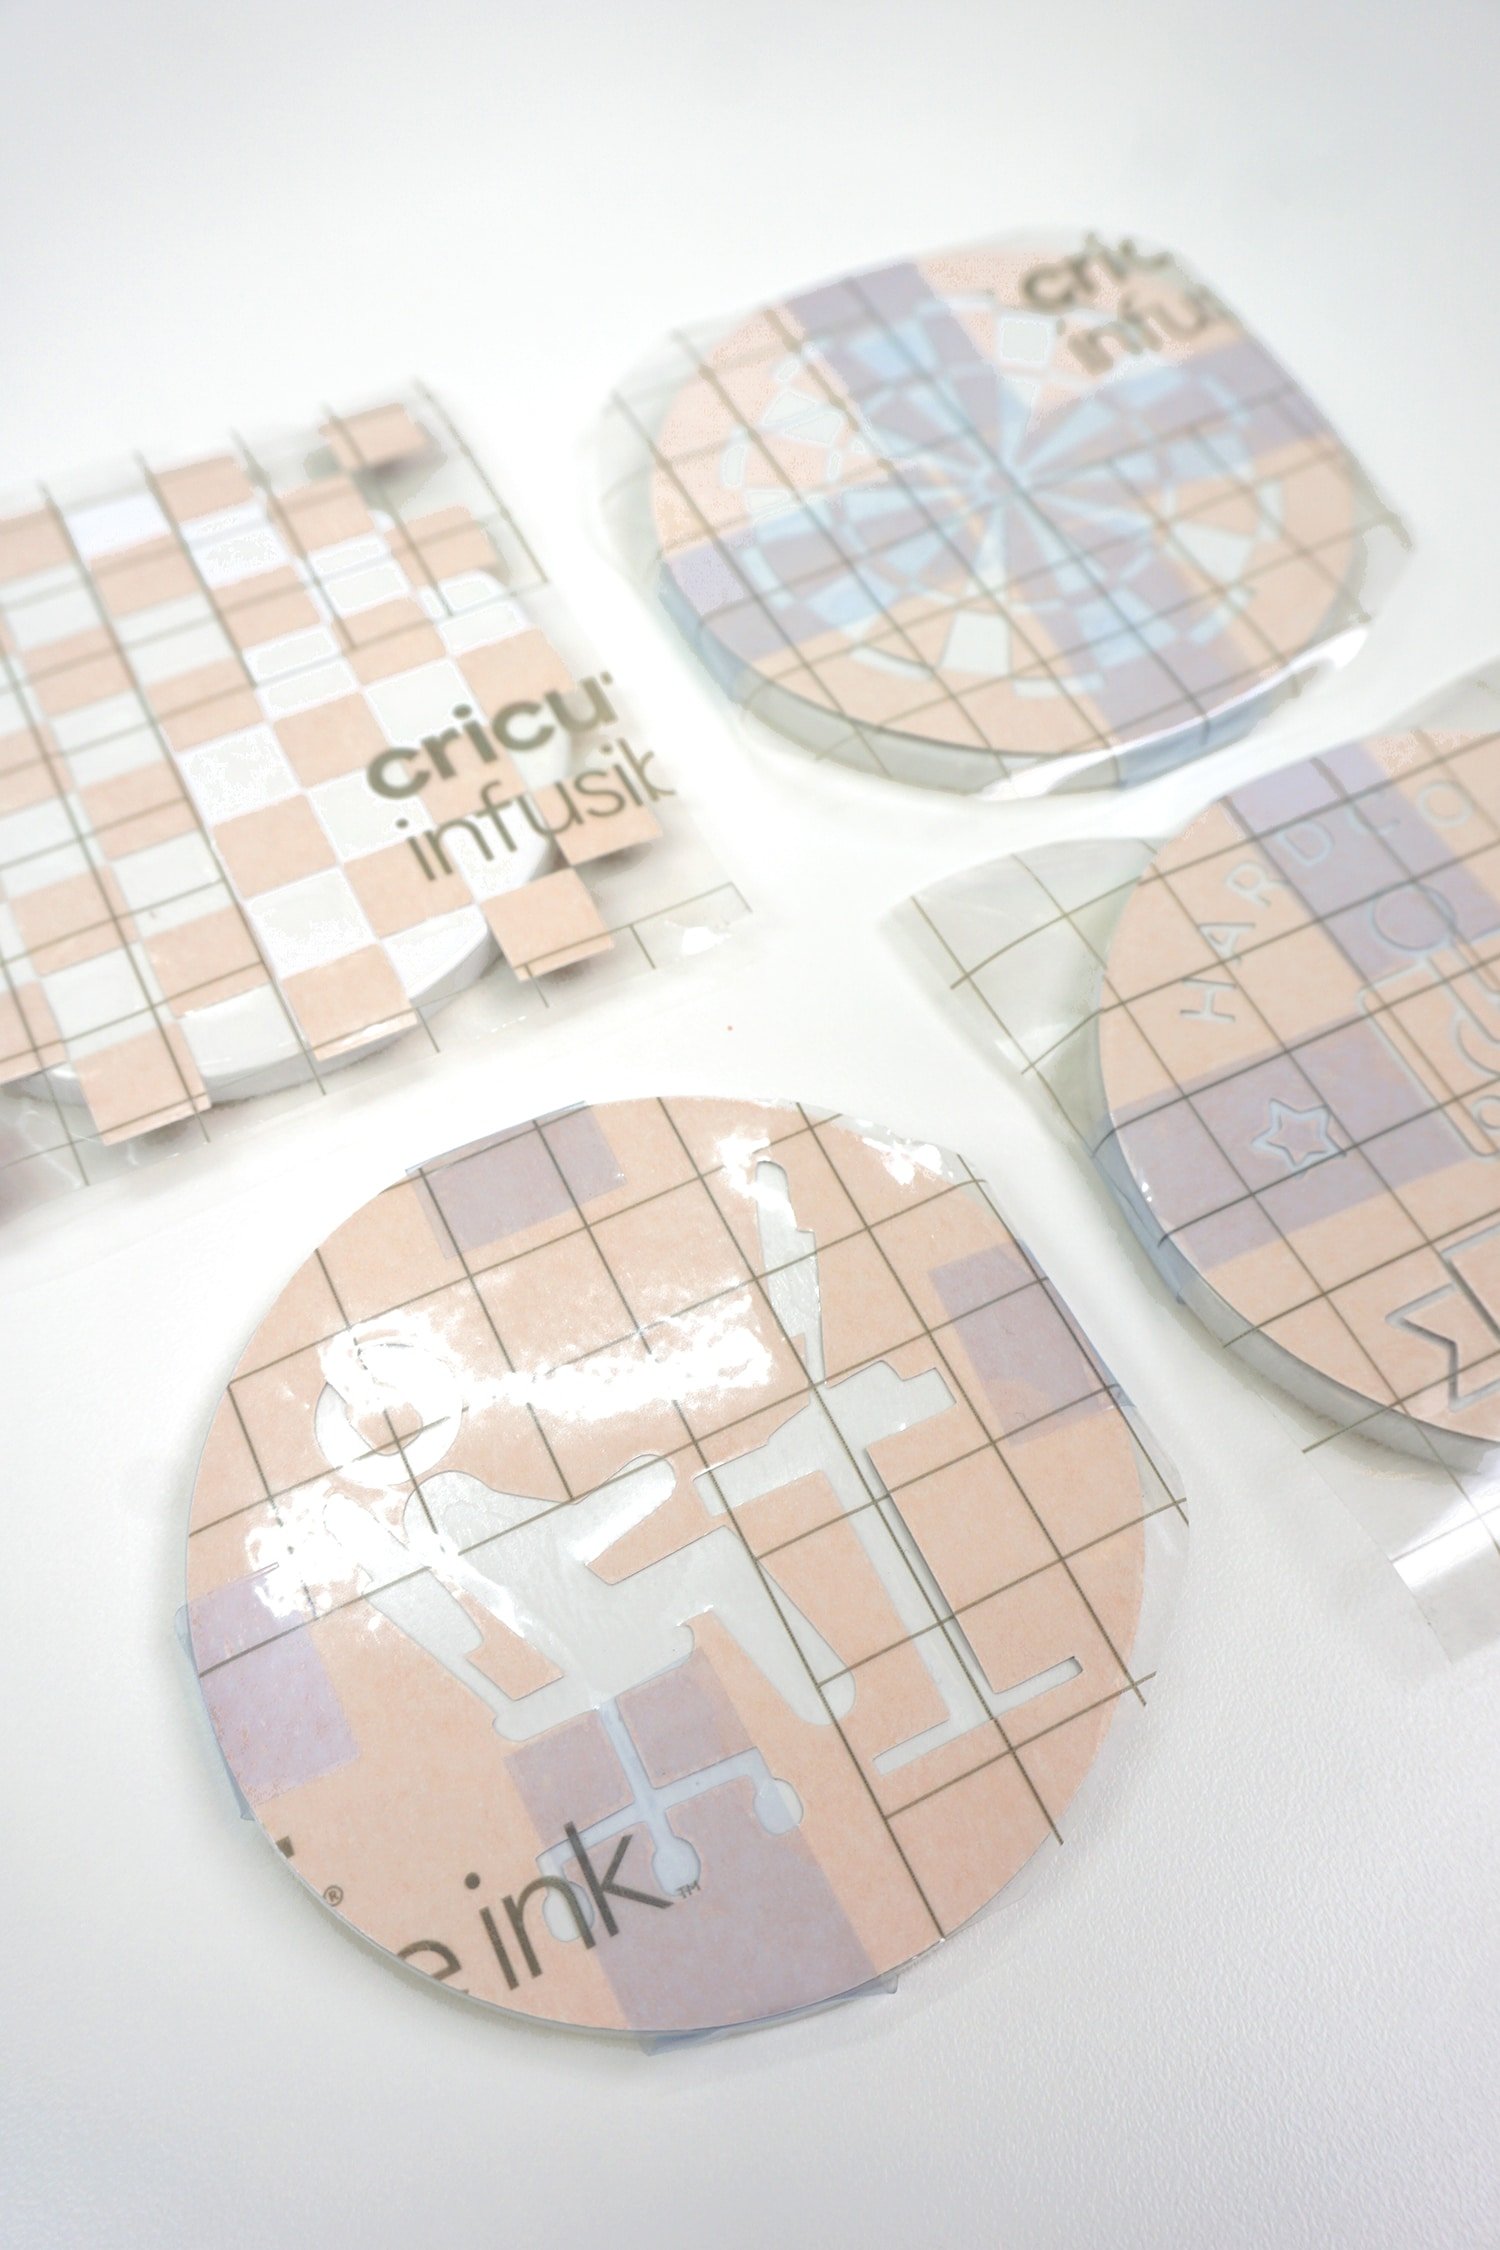 cricut designs added to blank white coasters